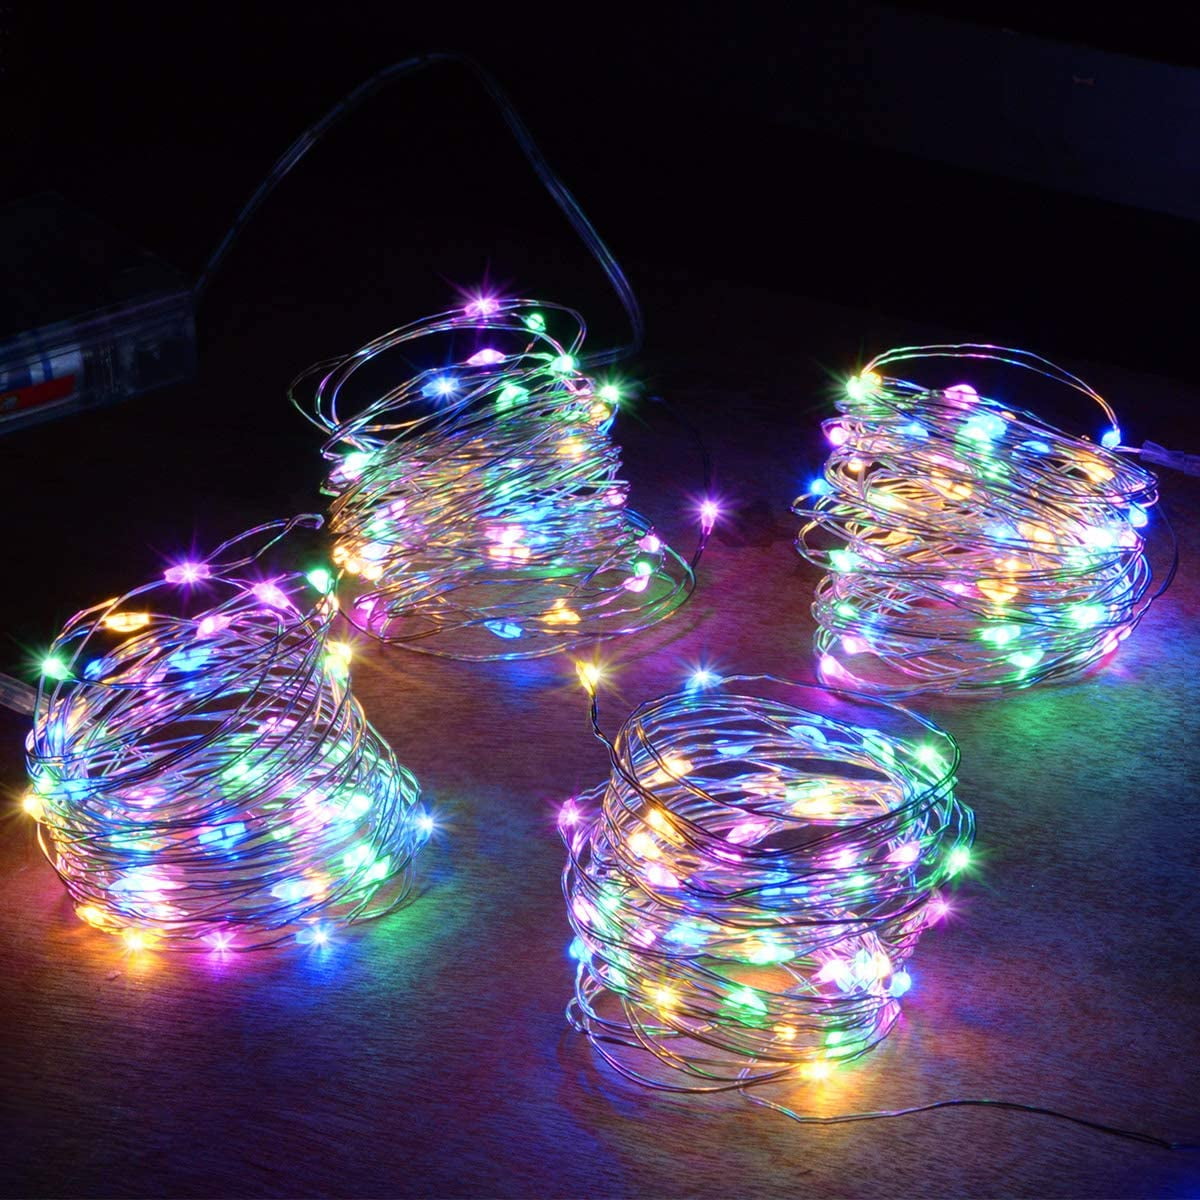 15 x 20 LEDs Fairy String Milticolor 2M Batteries Included 